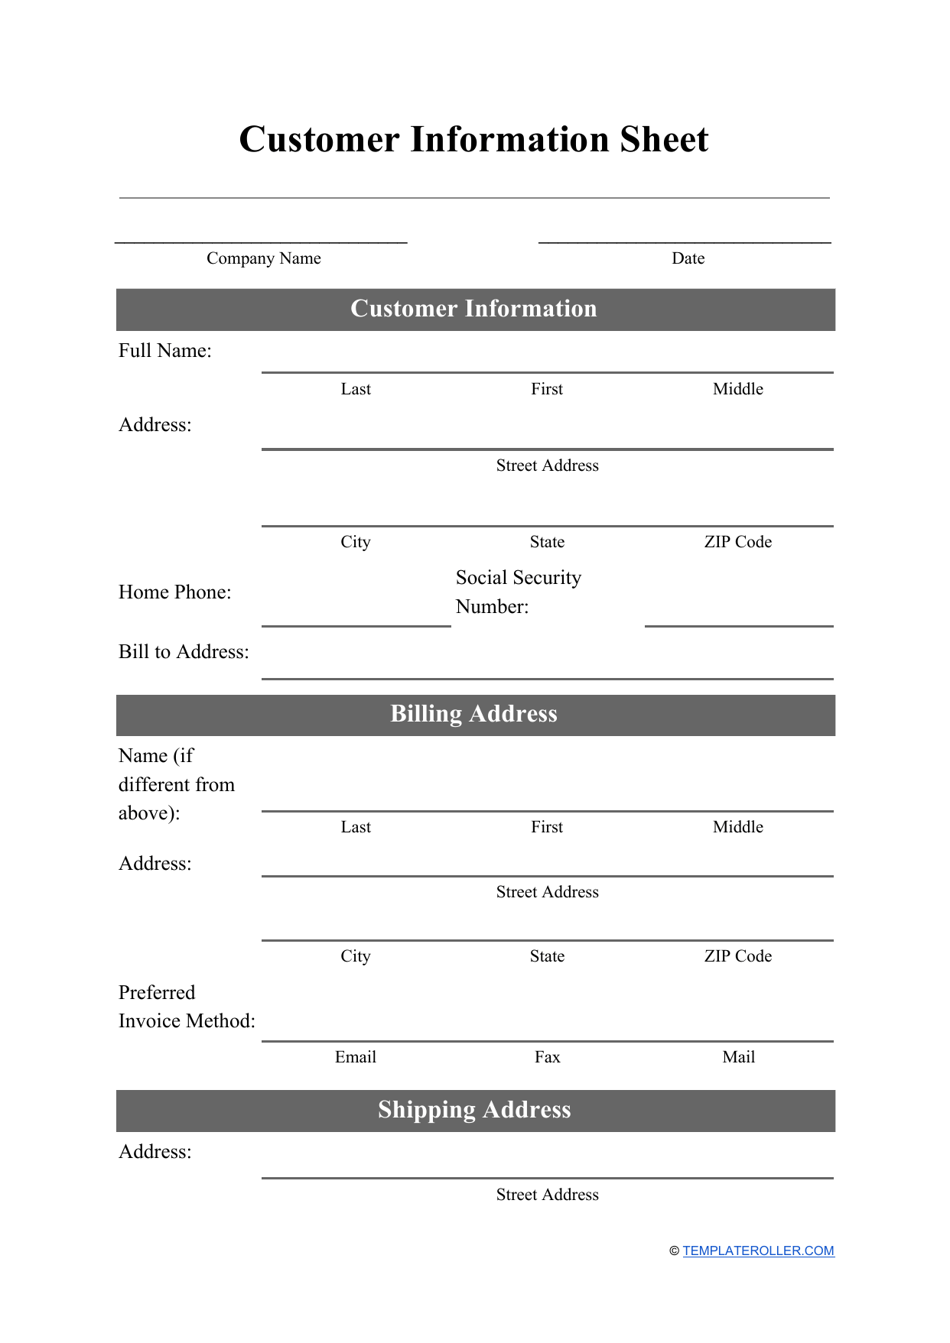 Customer Information Sheet Template, Page 1